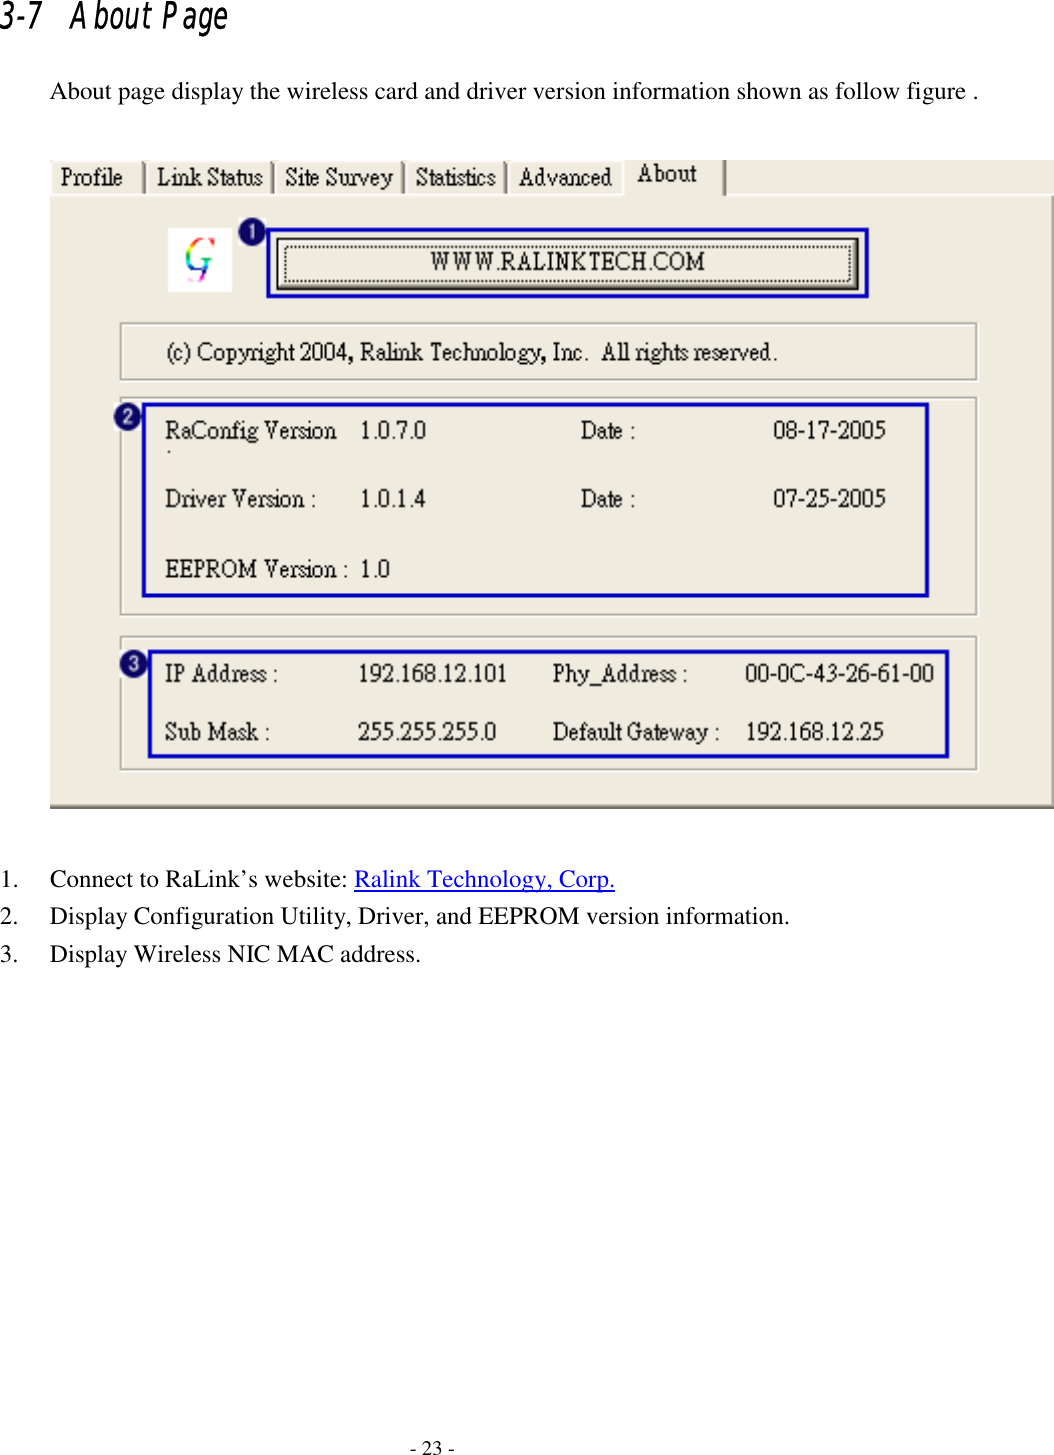    - 23 - 3-7   About Page About page display the wireless card and driver version information shown as follow figure .   1. Connect to RaLink’s website: Ralink Technology, Corp. 2. Display Configuration Utility, Driver, and EEPROM version information. 3. Display Wireless NIC MAC address. 